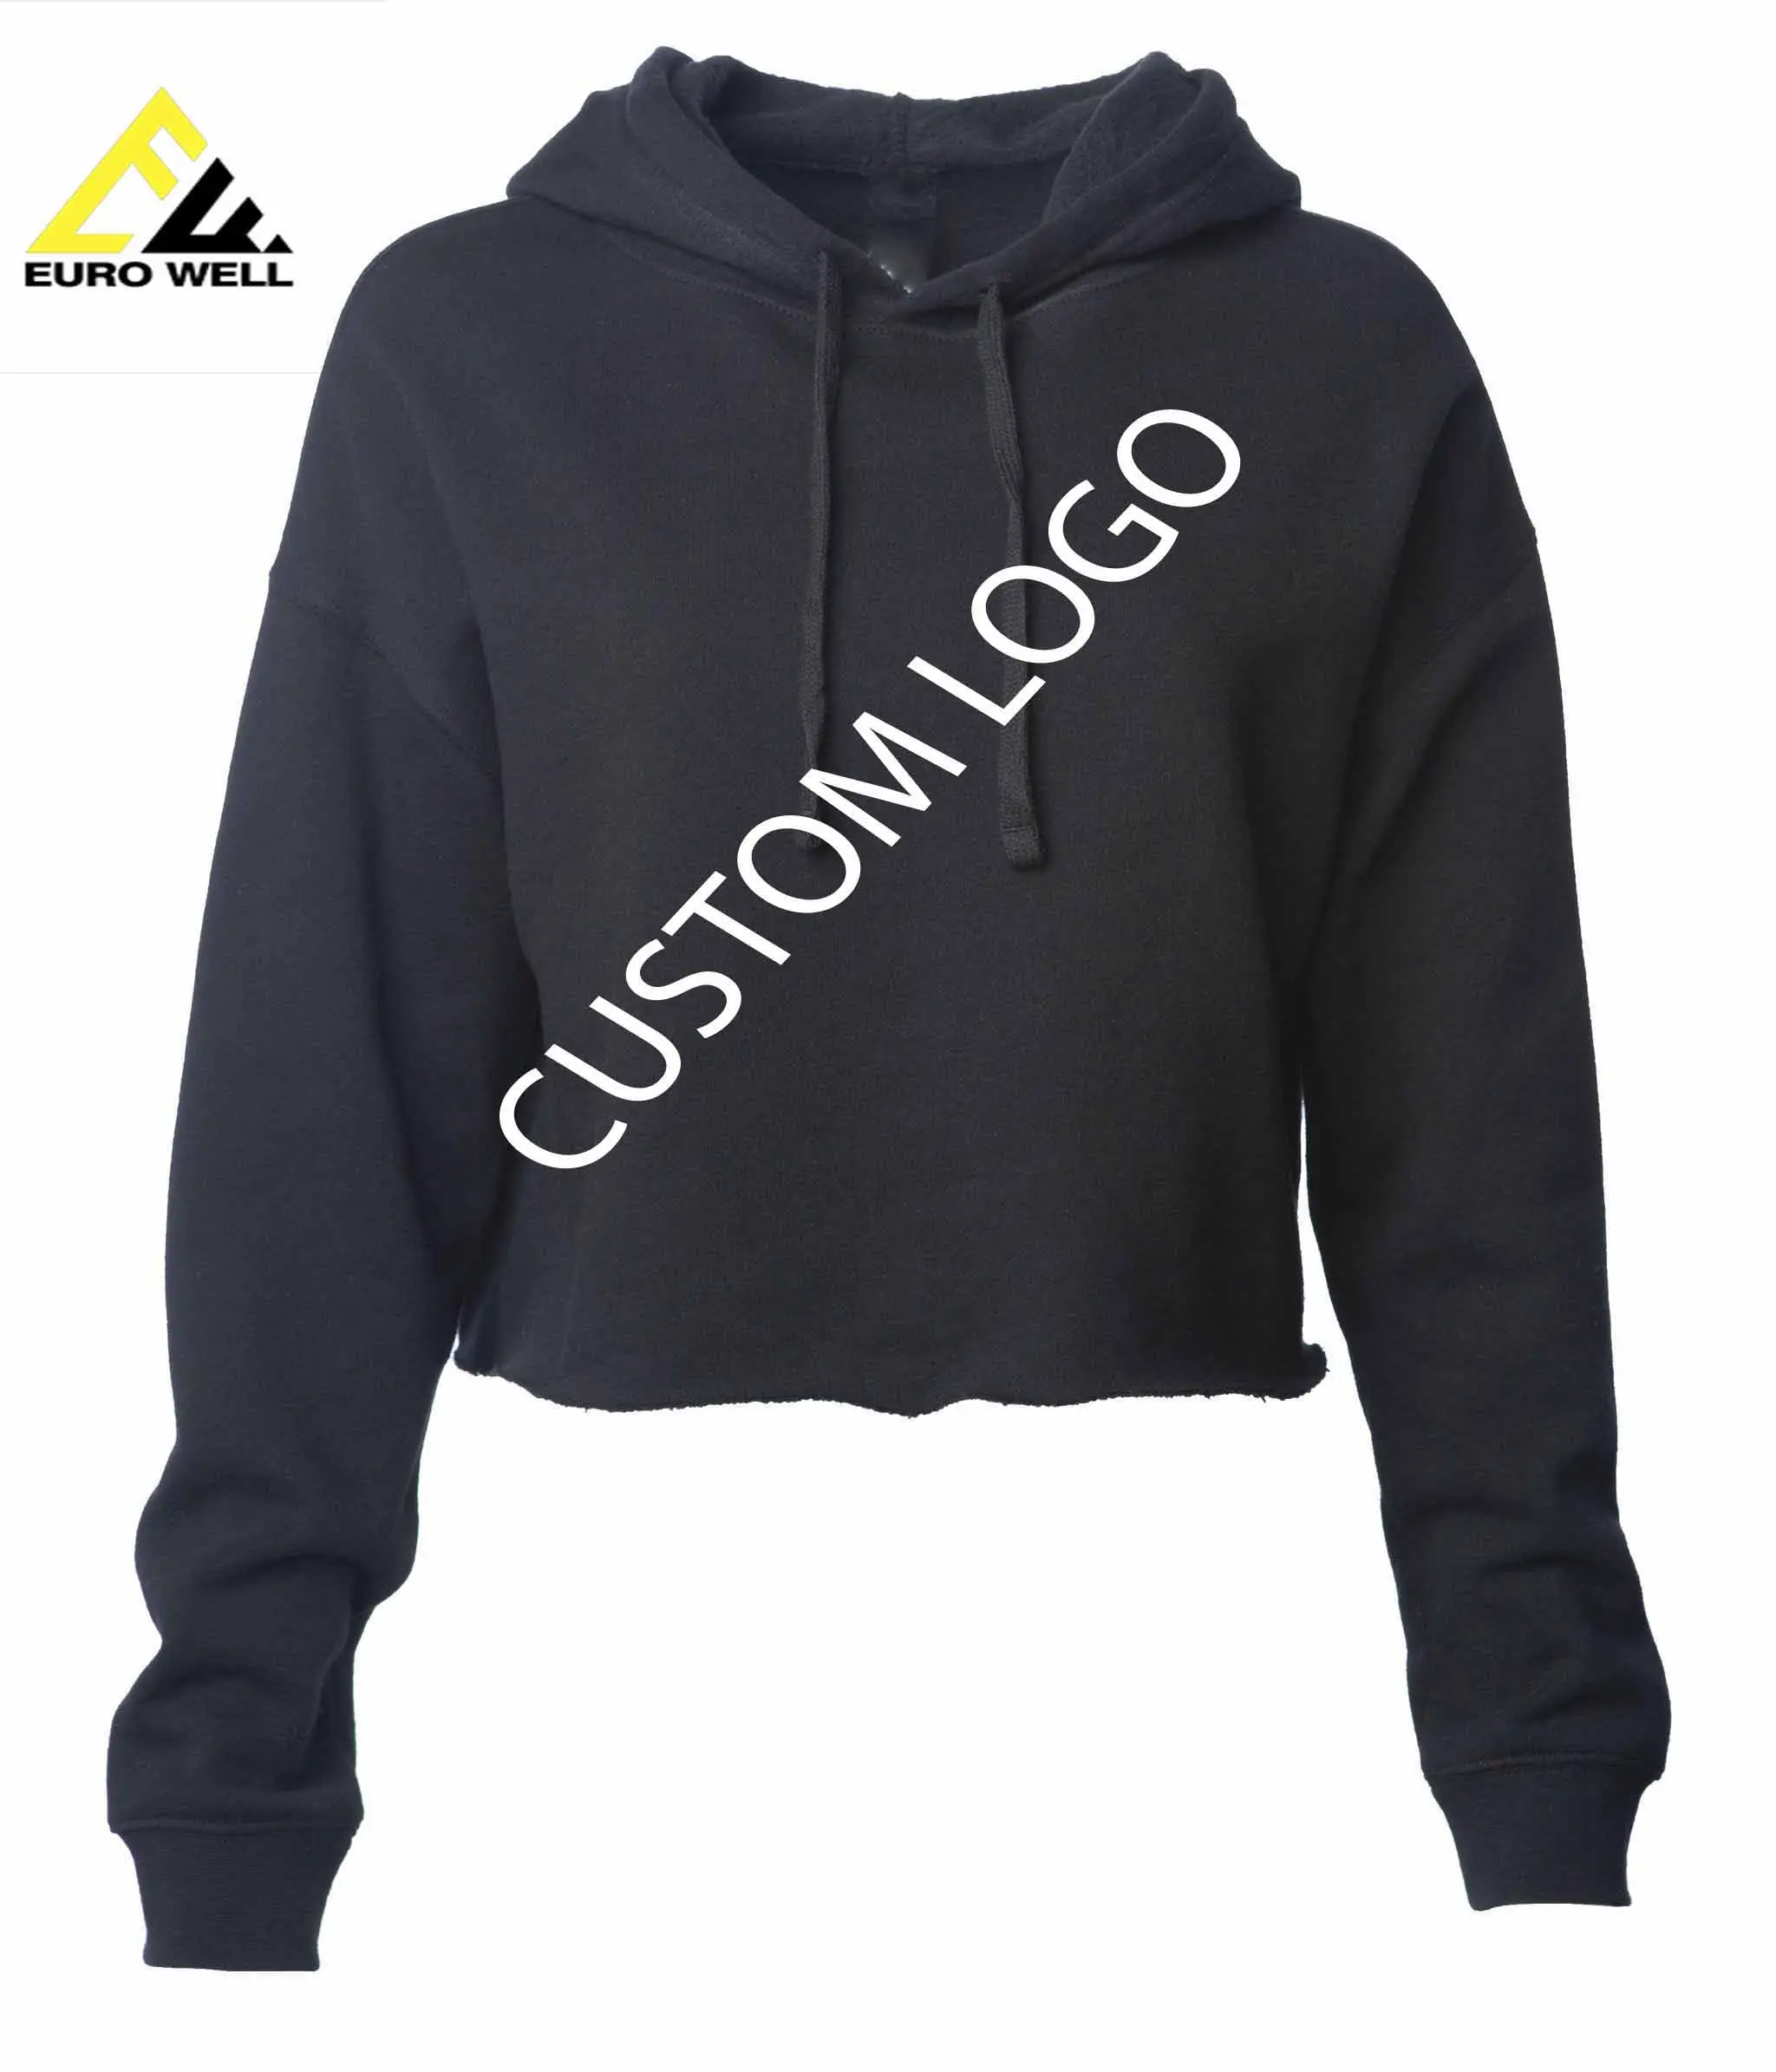 New Style pro Quality breathable Warmest Youth sizes Long Sleeve Hoodie for men and women